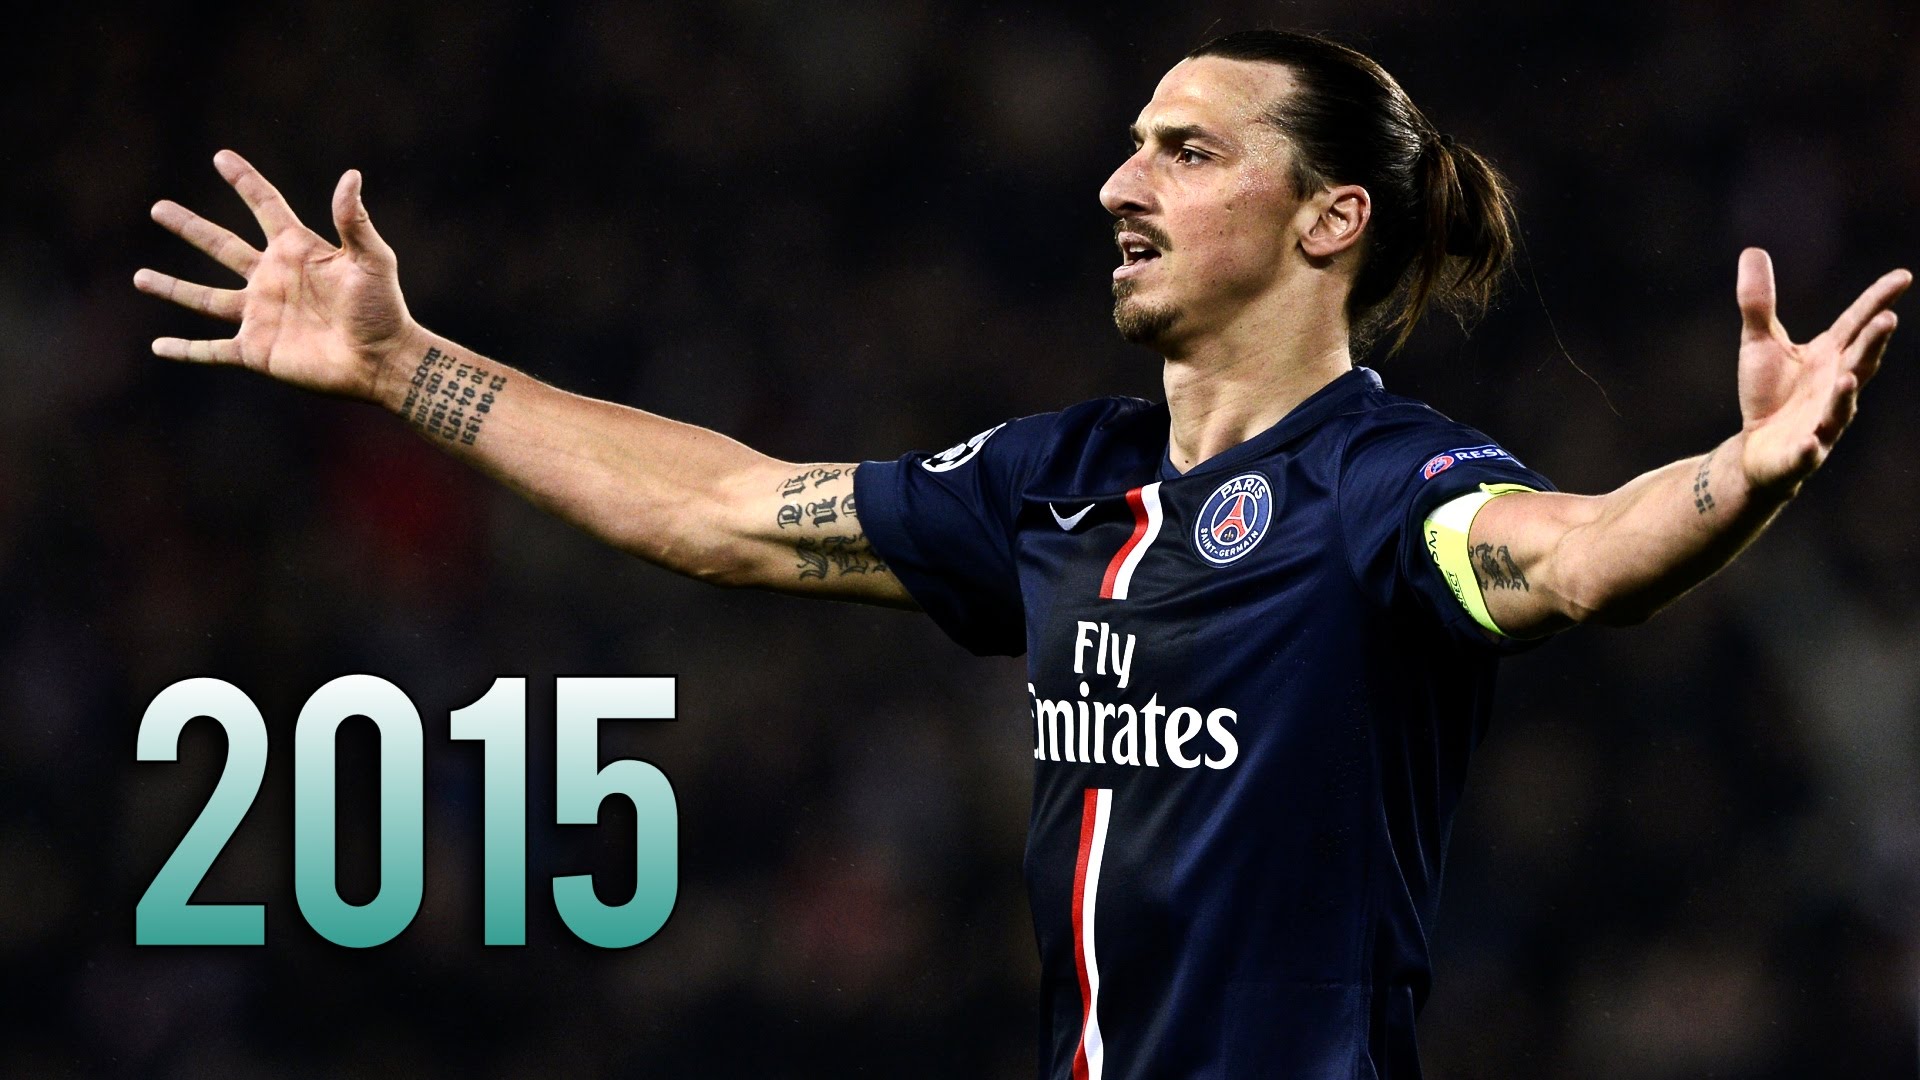 Zlatan Ibrahimovic Backgrounds, Compatible - PC, Mobile, Gadgets| 1920x1080 px